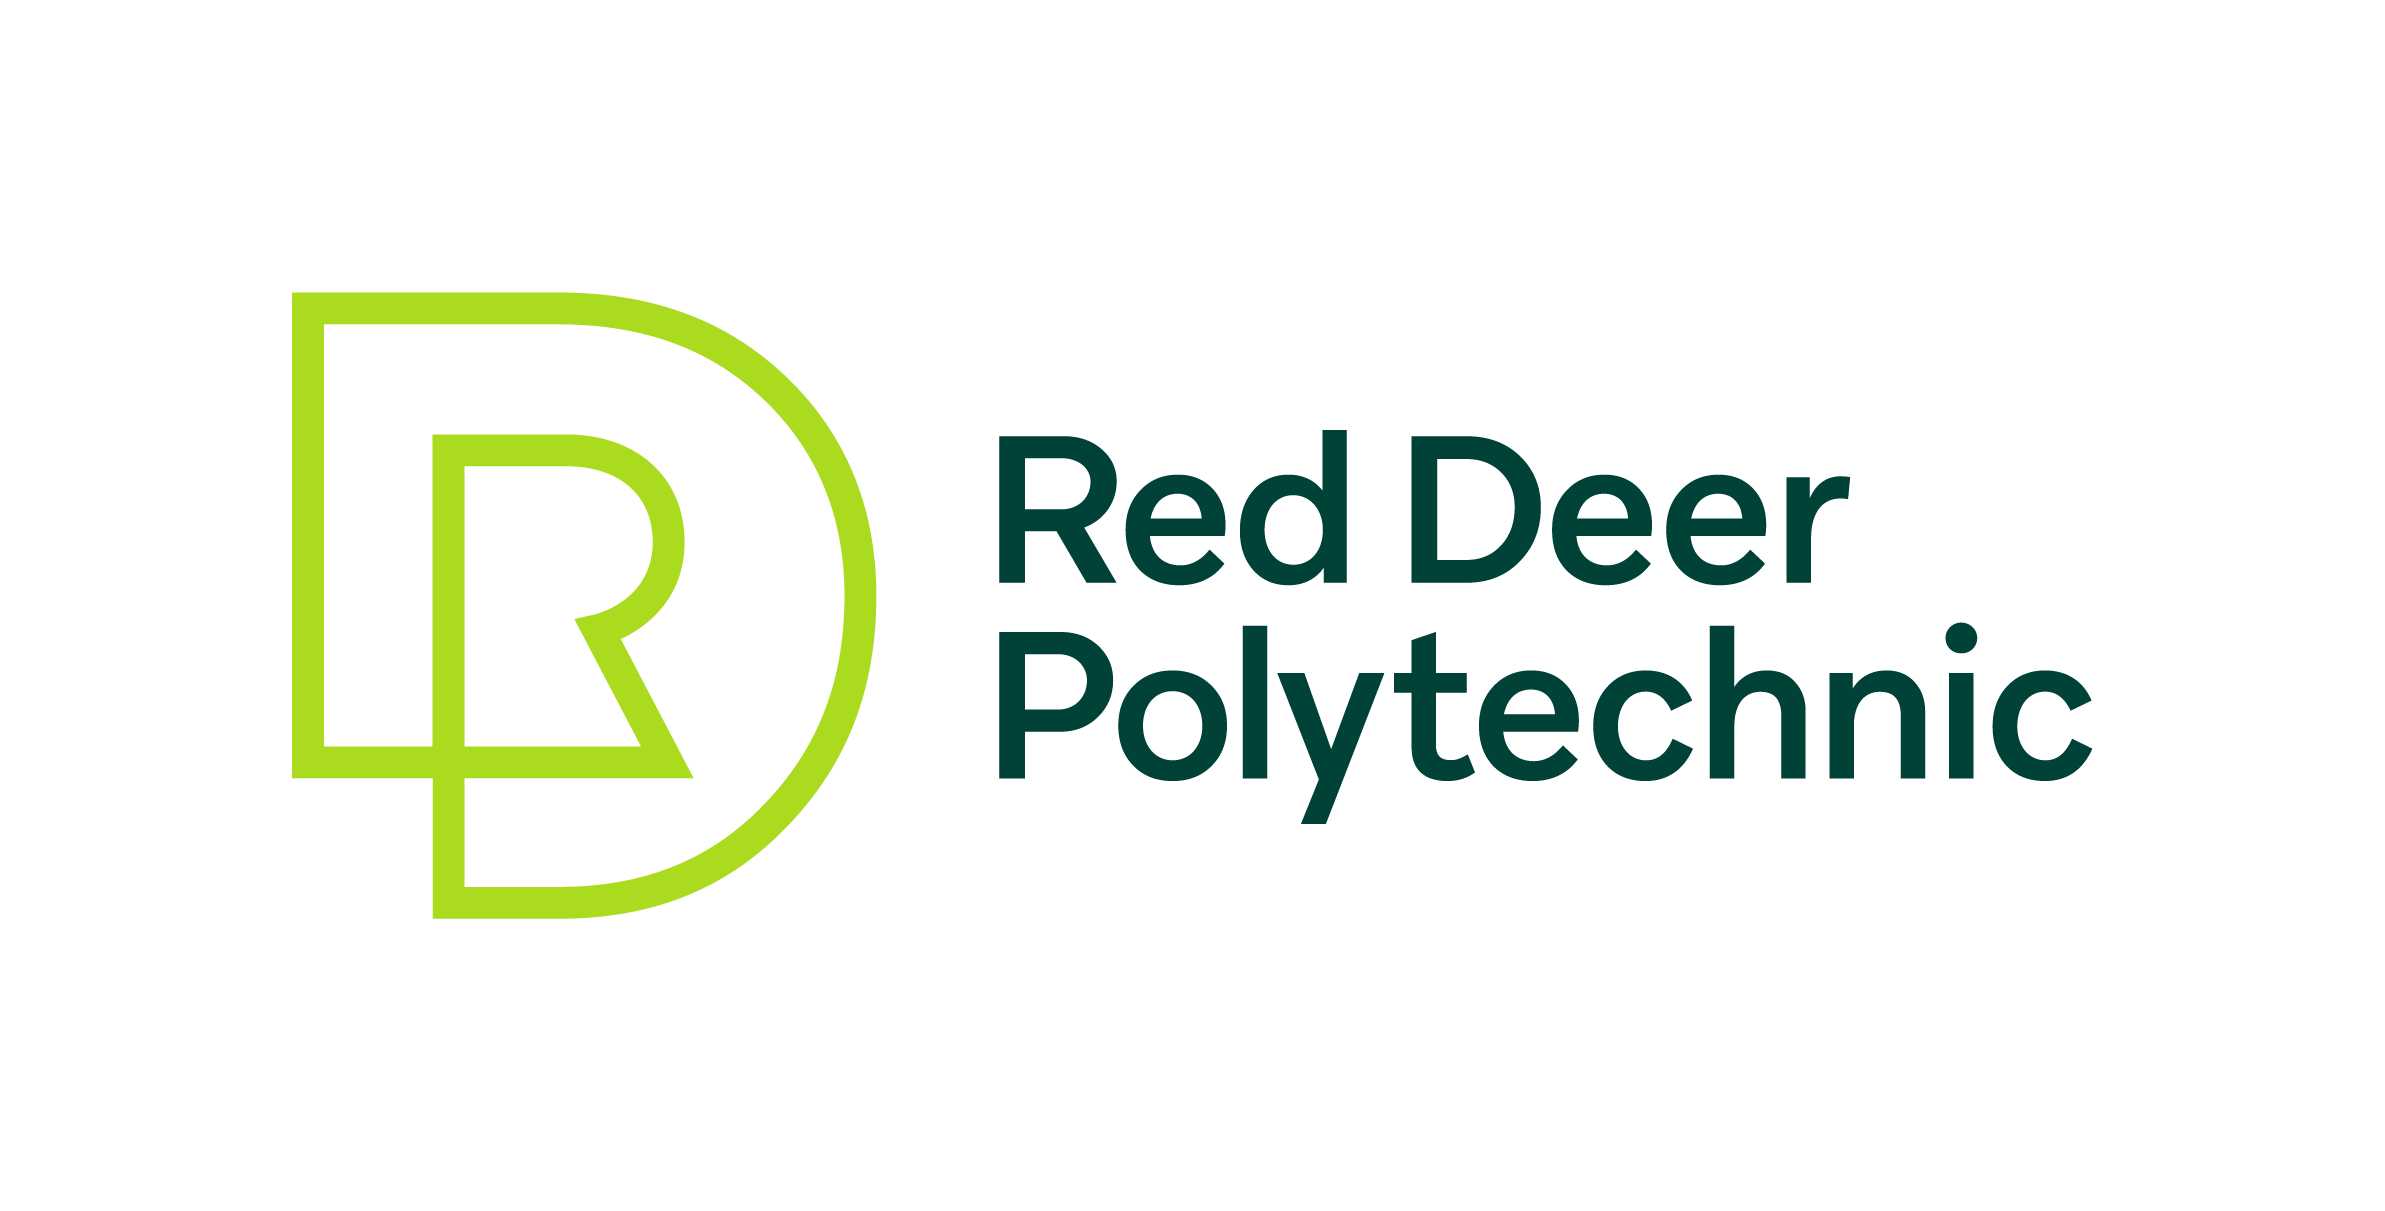 Red Deer Polytechnic Testing Services  Resource Registration